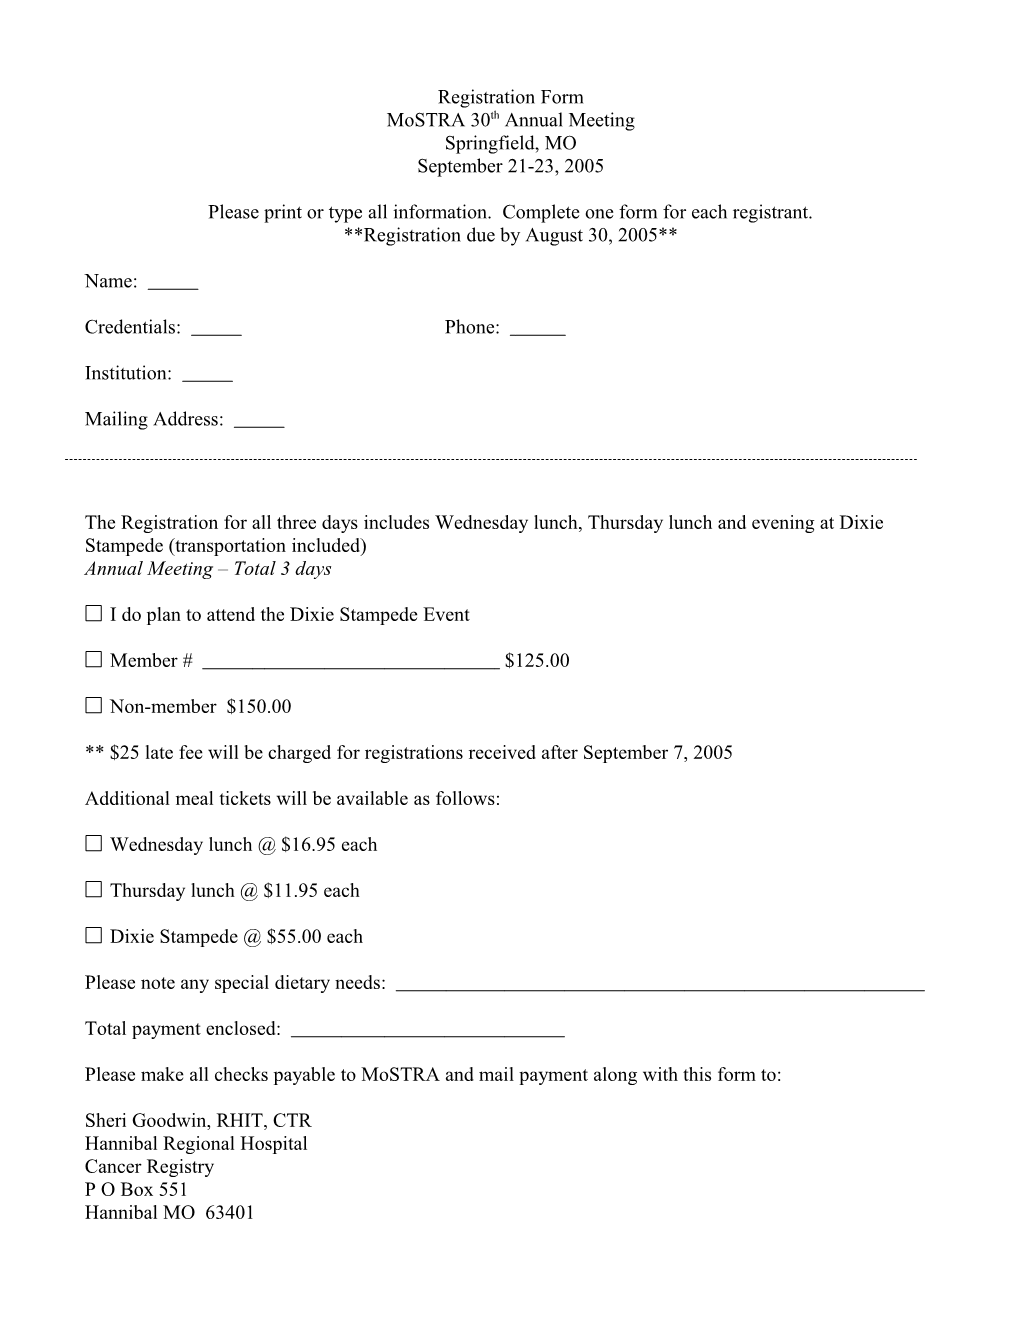 Please Print Or Type All Information. Complete One Form for Each Registrant